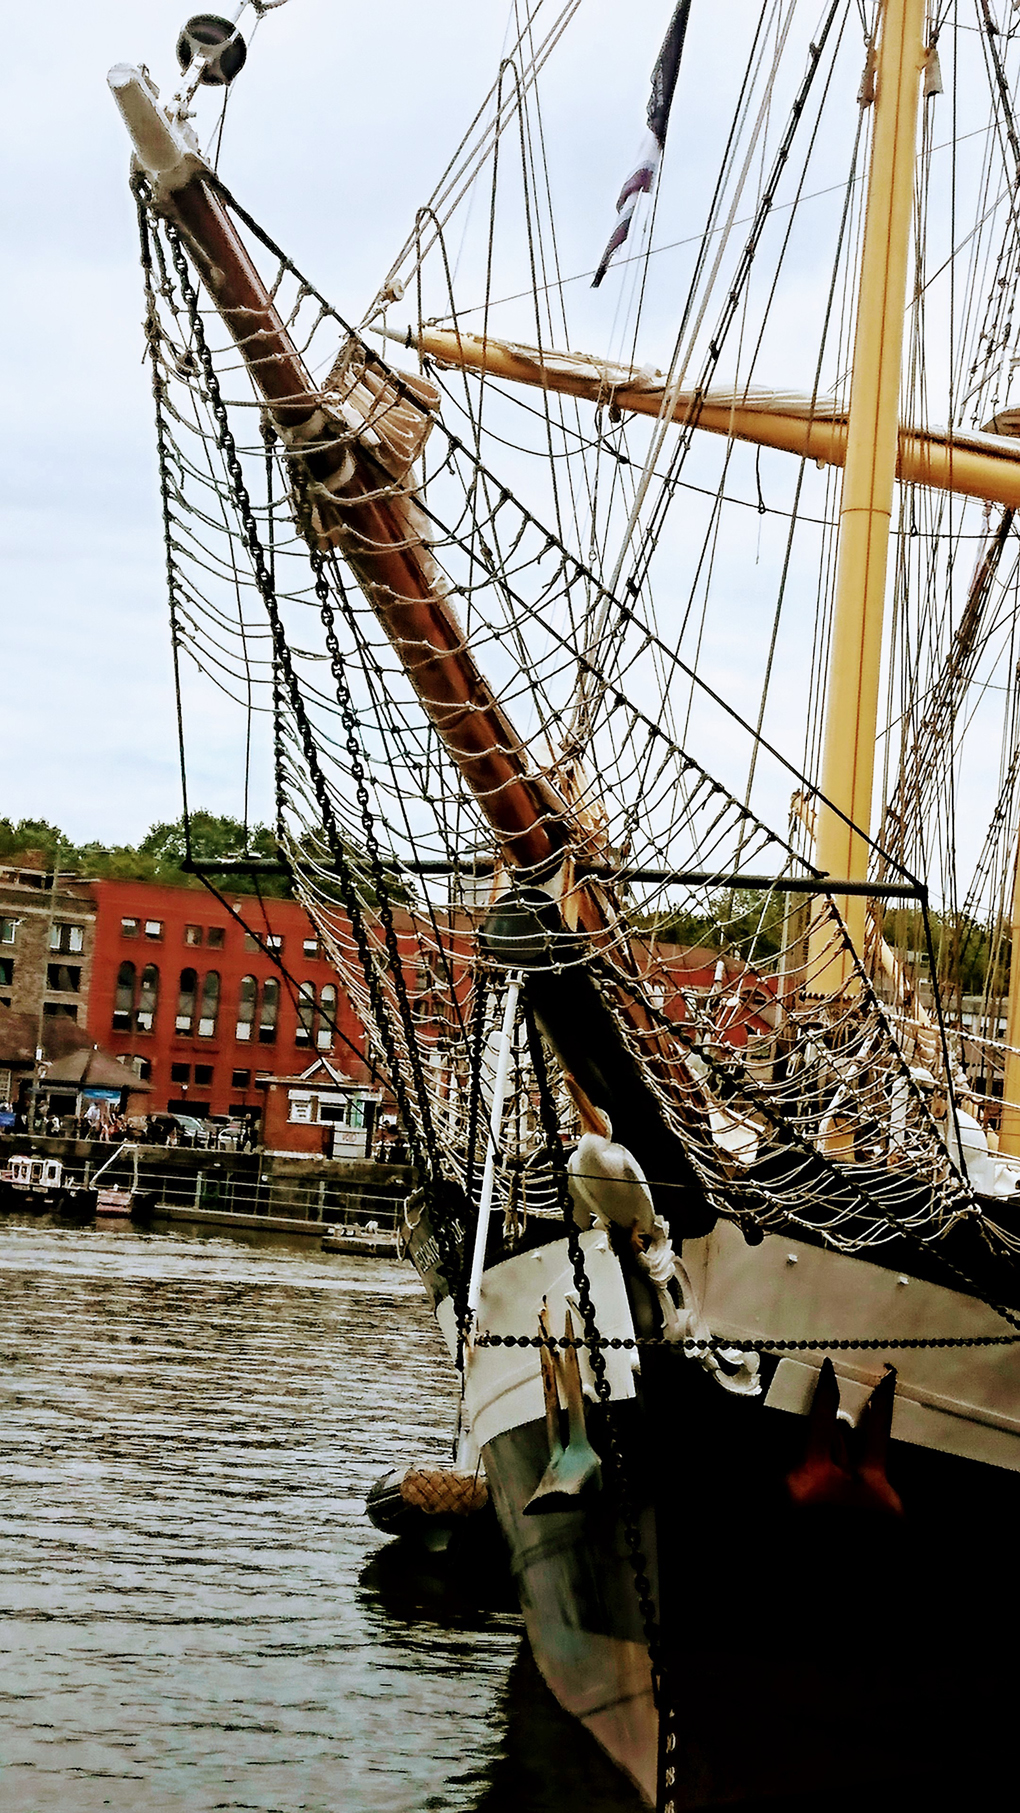 A picture of a lovely old Tall Ship proudly displaying a Pelican as it’s figurehead on the prow - they usually have a fair maiden as figurehead so this is unusual. The ship is called The Pelican of London and was a lovely visitor to Bristol, clad in all its rigging.